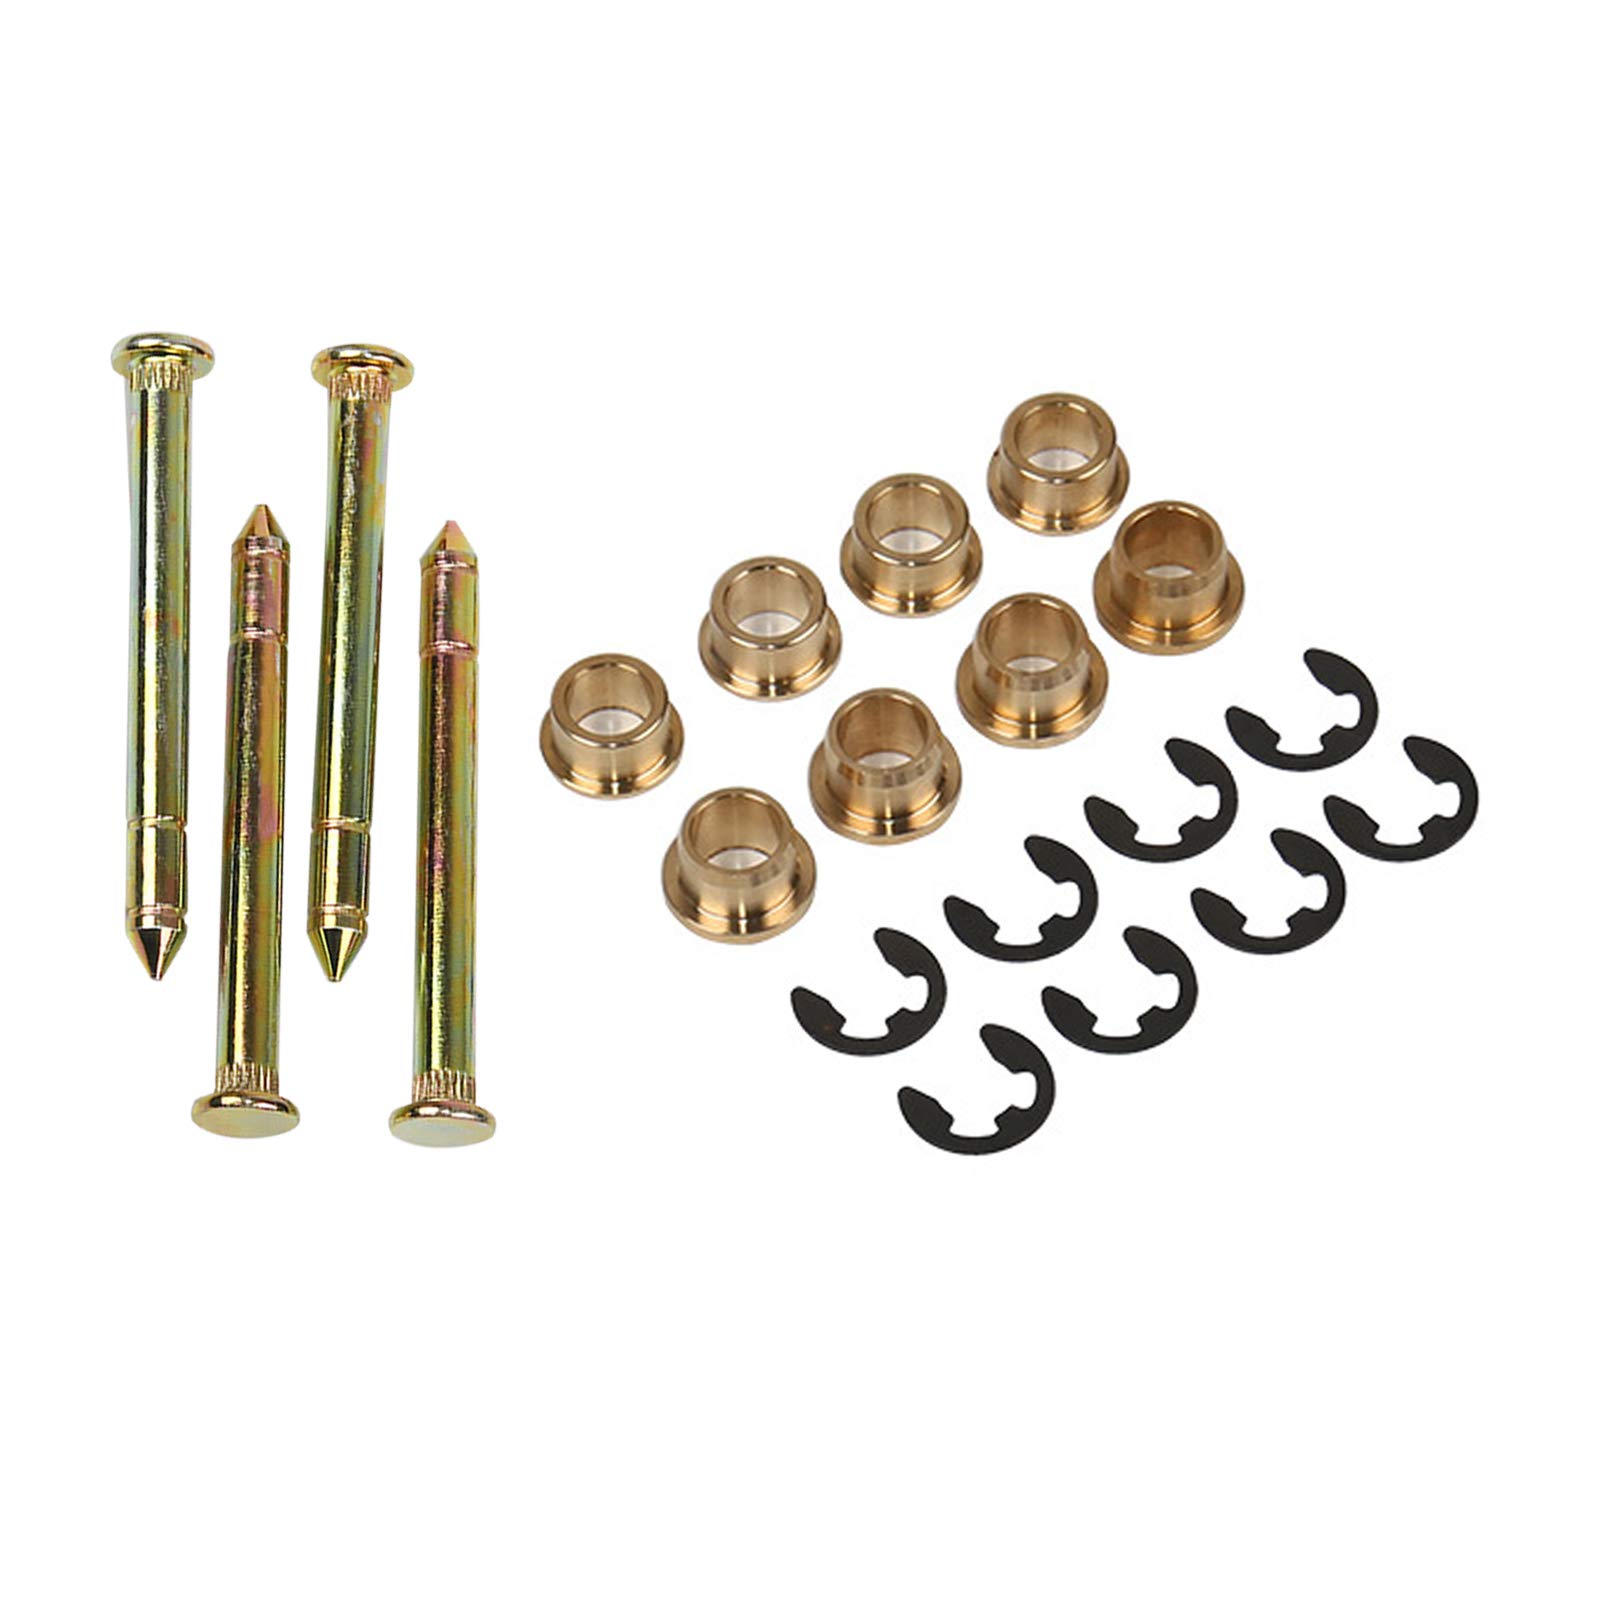 OxoxO Car Door Hinge Pins and Pin Bushing Front Both Door Kit Compatible with Ford F150 F250 F350 Bronco Repalcement Part # 38410 AM-33073275